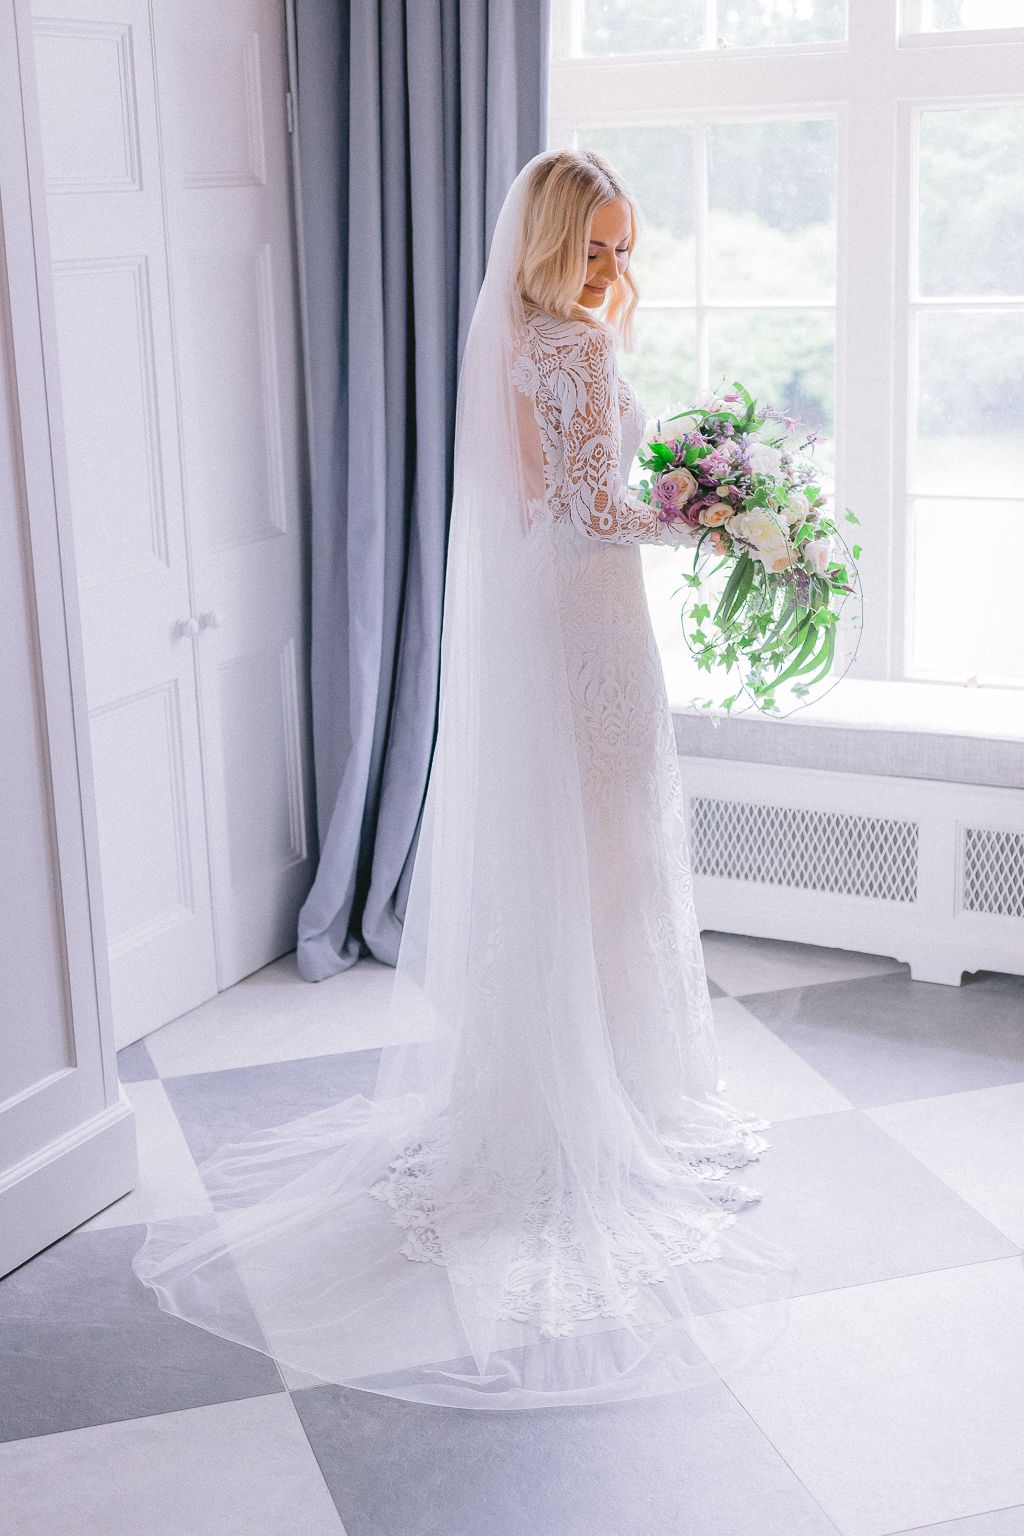 Bride stands ready for wedding facing window holding bouquet of flowers